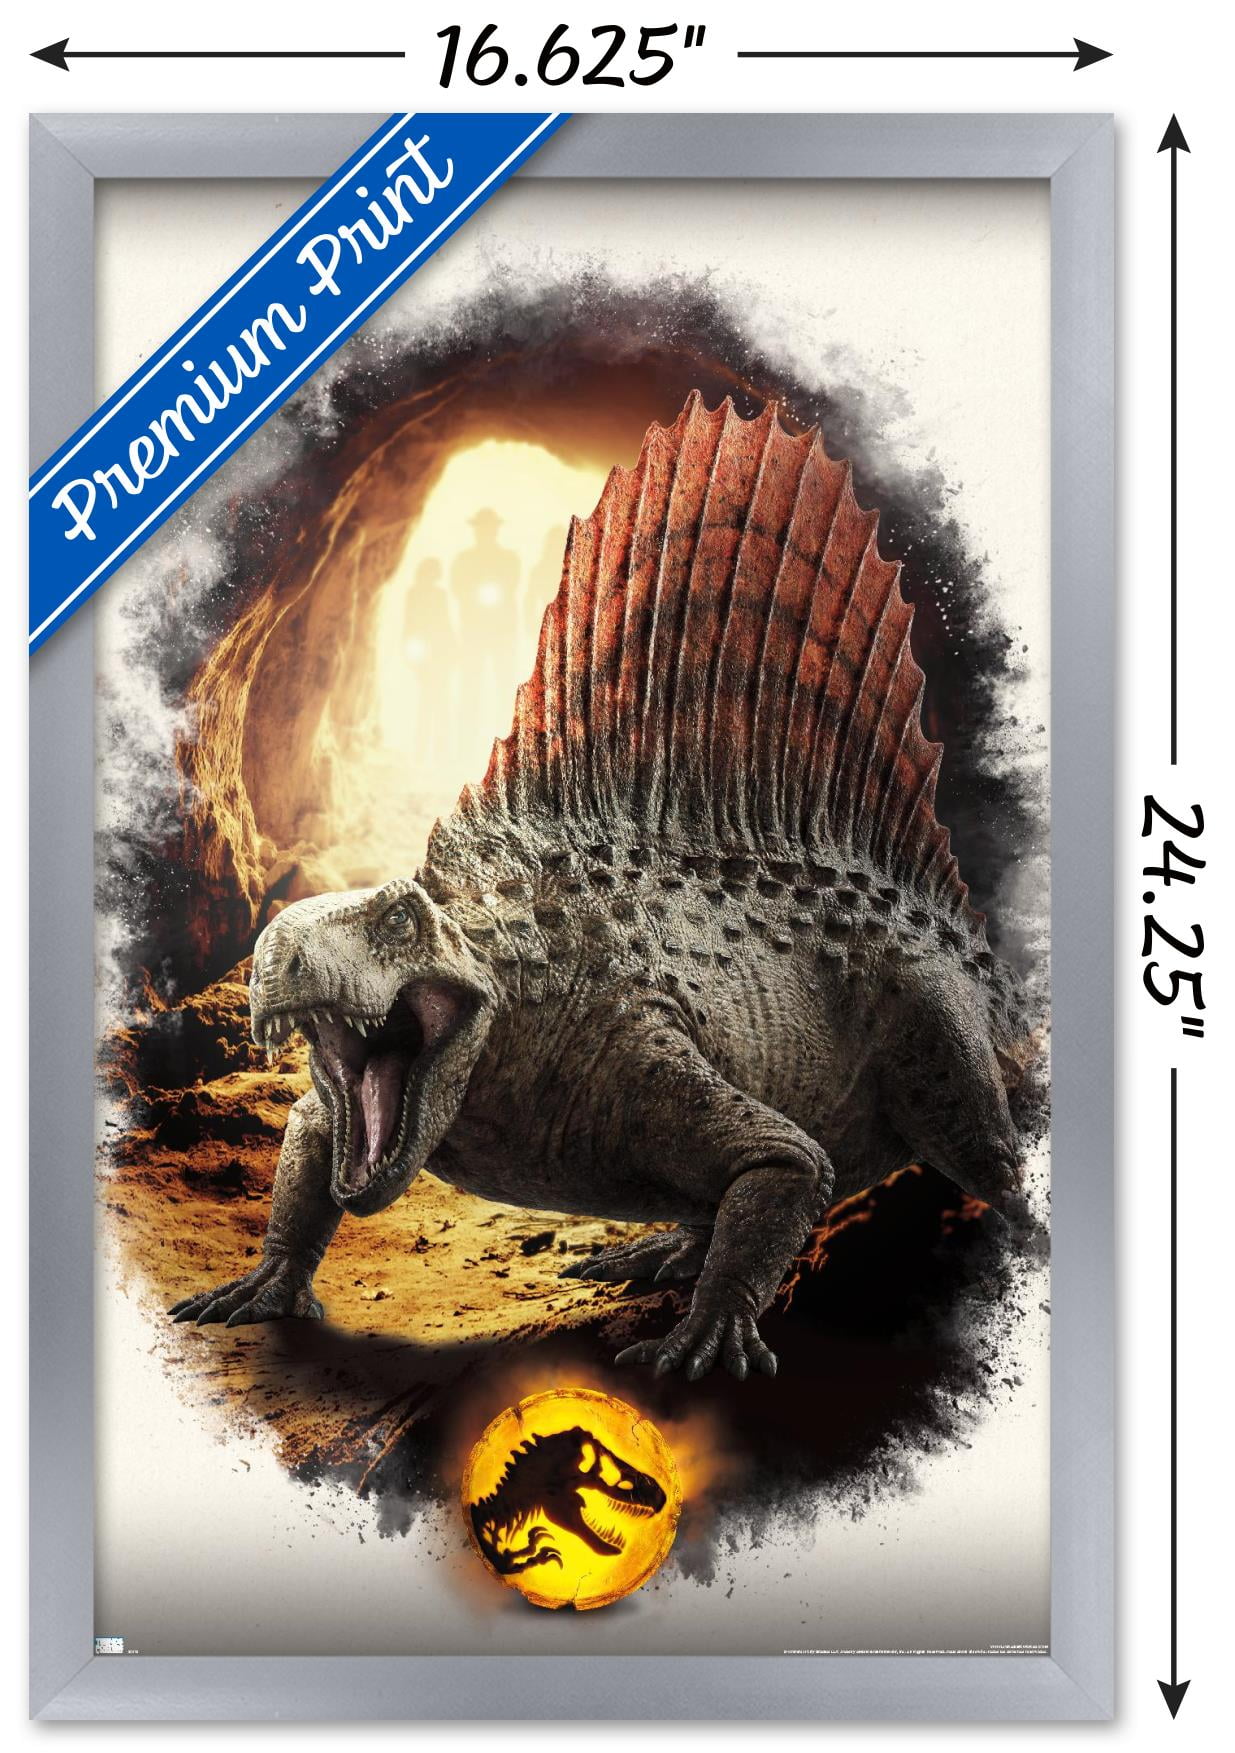 Jurassic World: Dominion - Dinosaur Spotted Here Wall Poster, 22.375 x 34